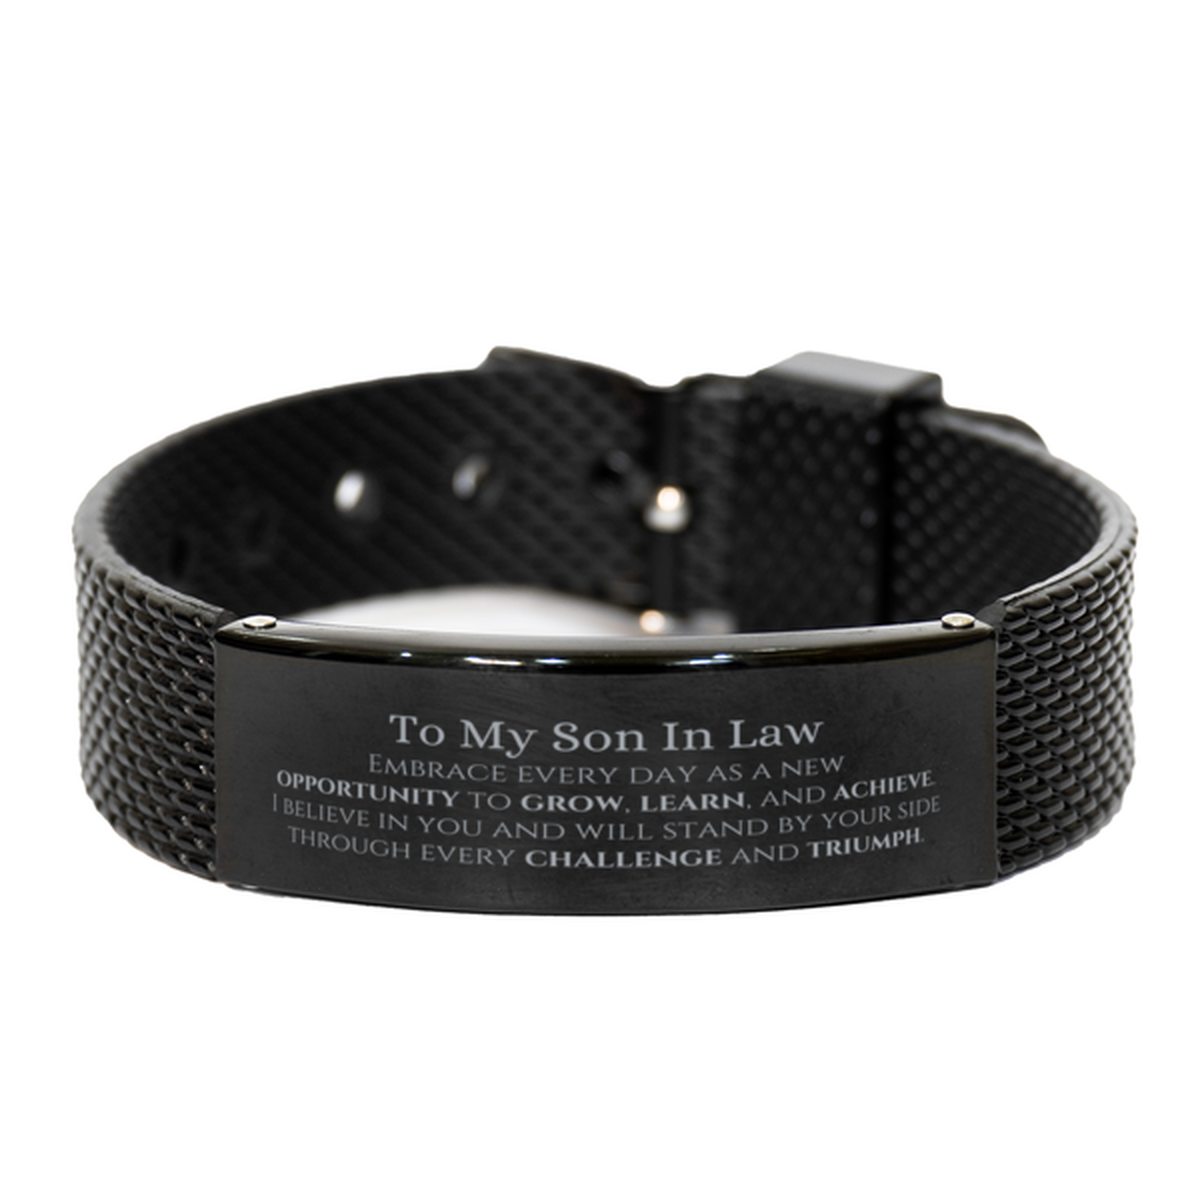 To My Son In Law Gifts, I believe in you and will stand by your side, Inspirational Black Shark Mesh Bracelet For Son In Law, Birthday Christmas Motivational Son In Law Gifts